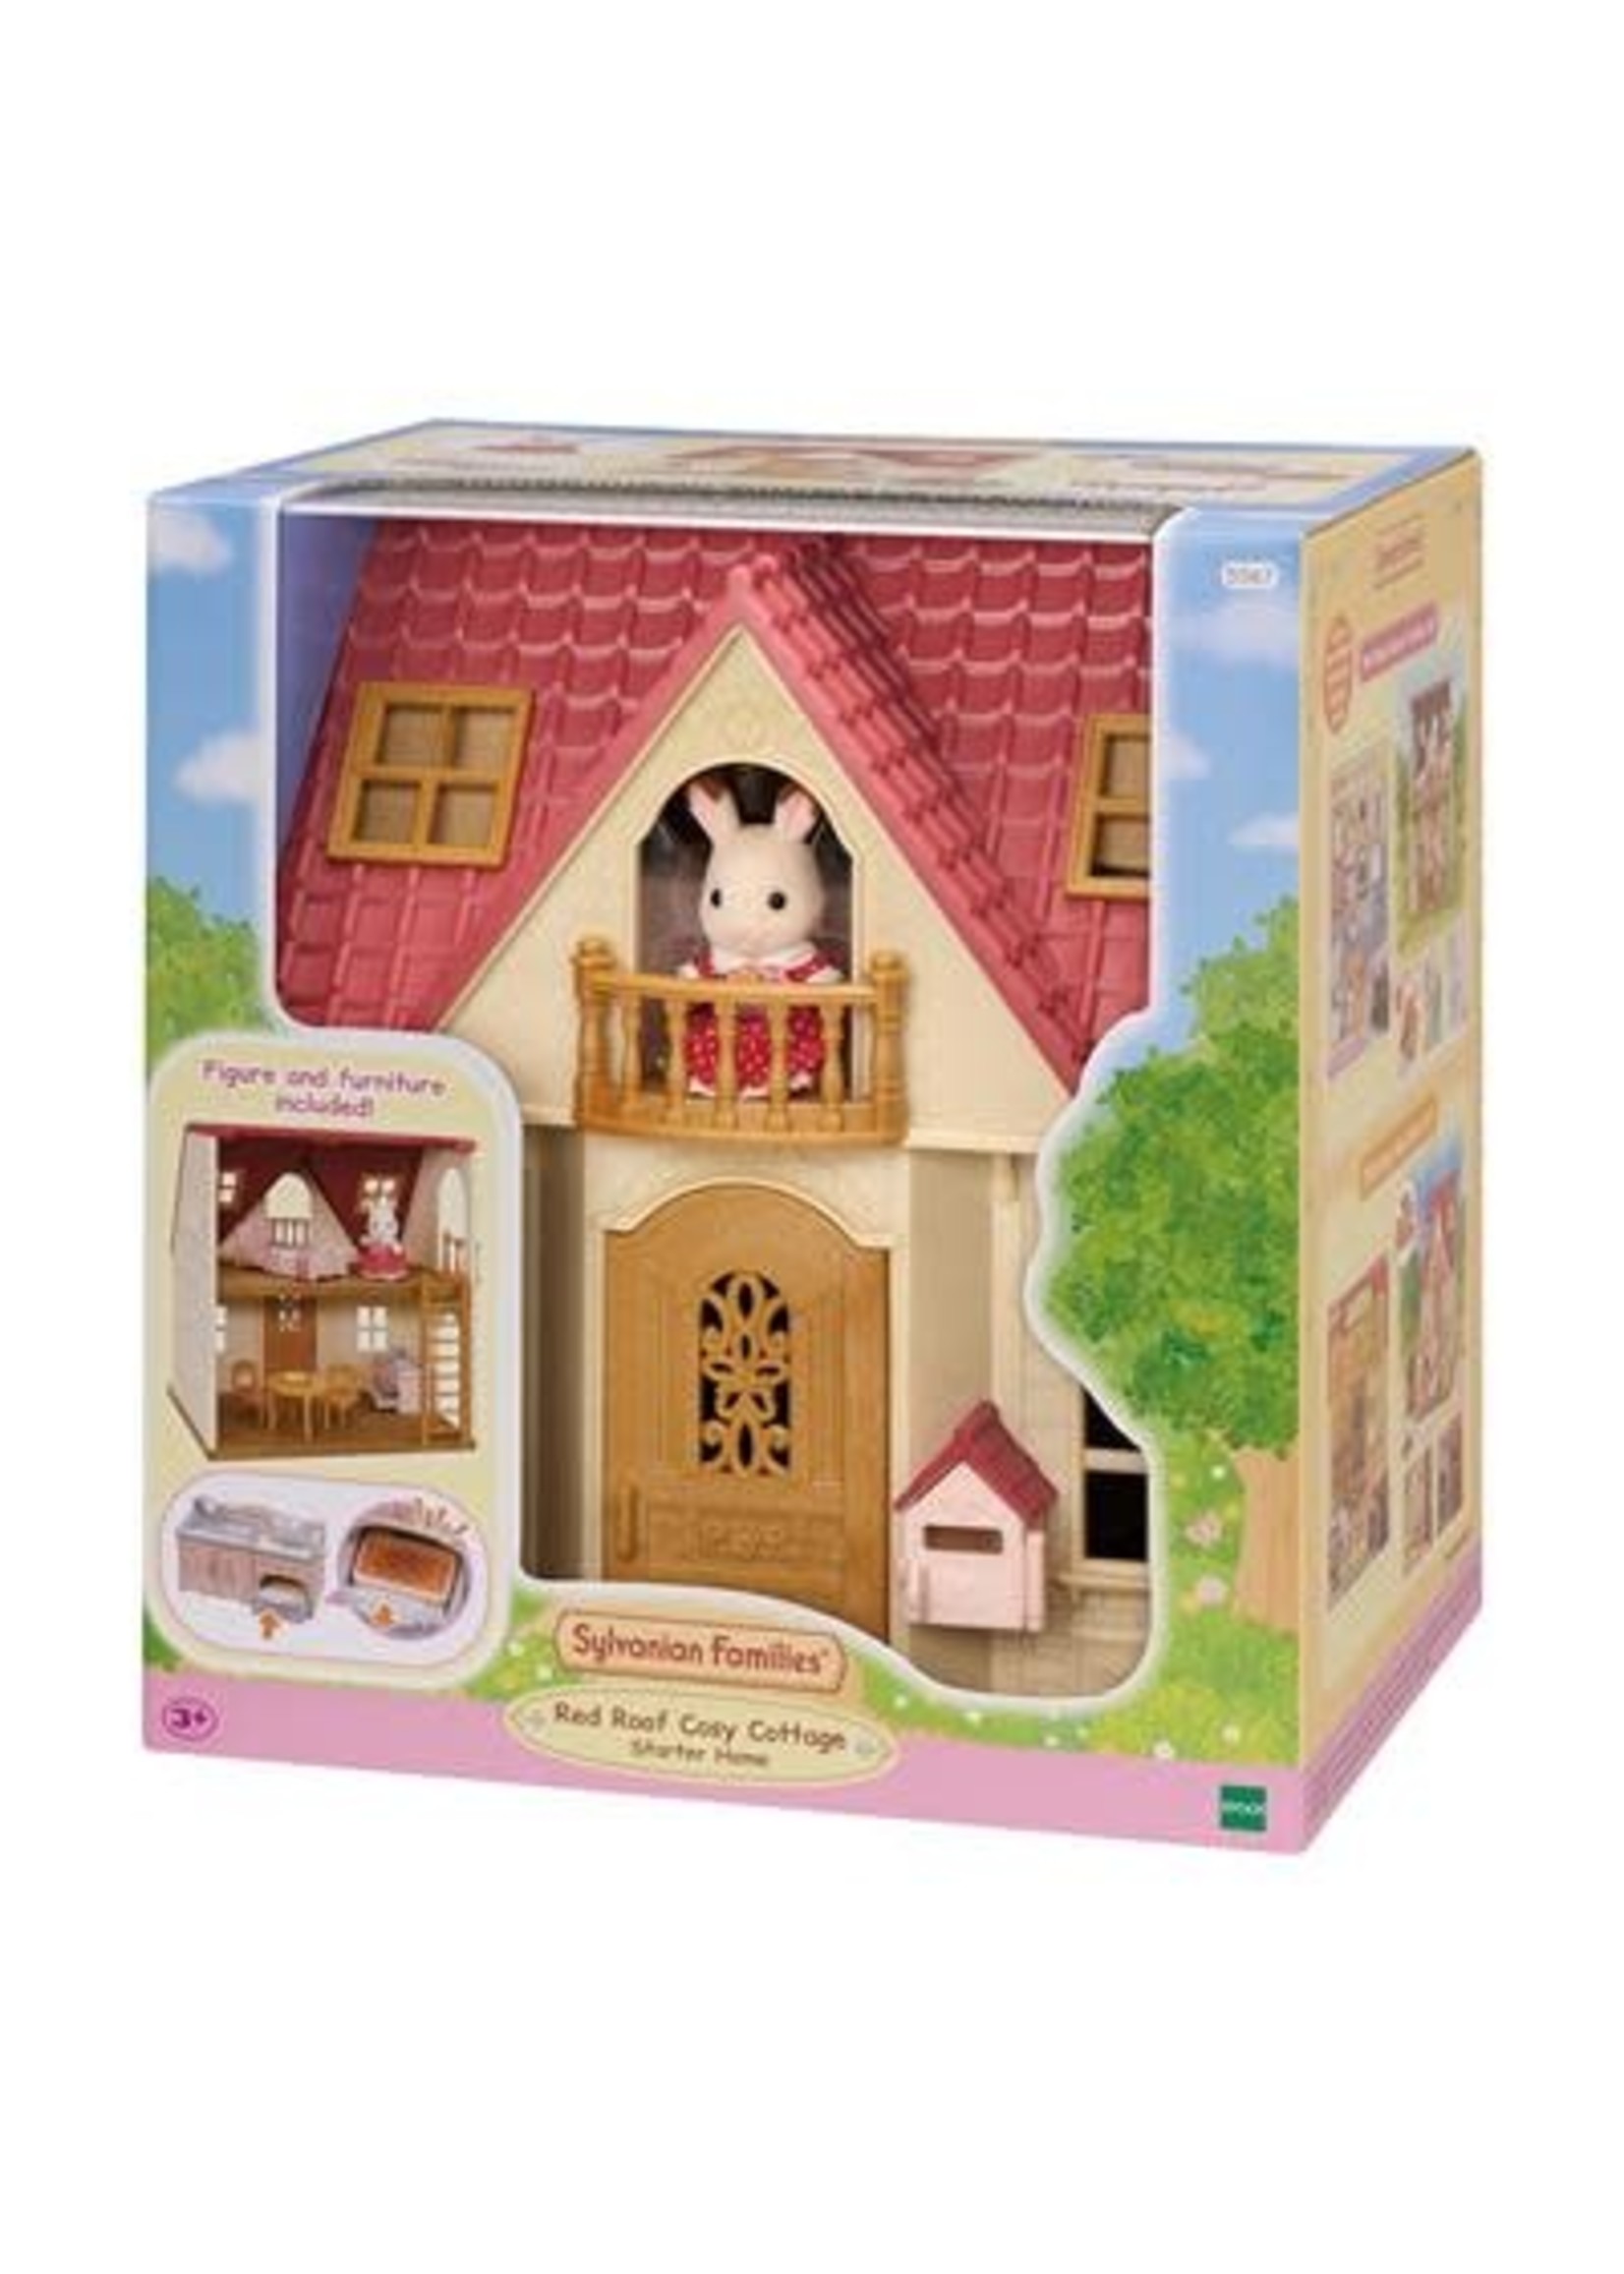 Sylvanian Families SYLVANIAN FAMILIES 5567 NEW RED ROOF COSY COTTAGE STARTER HOME